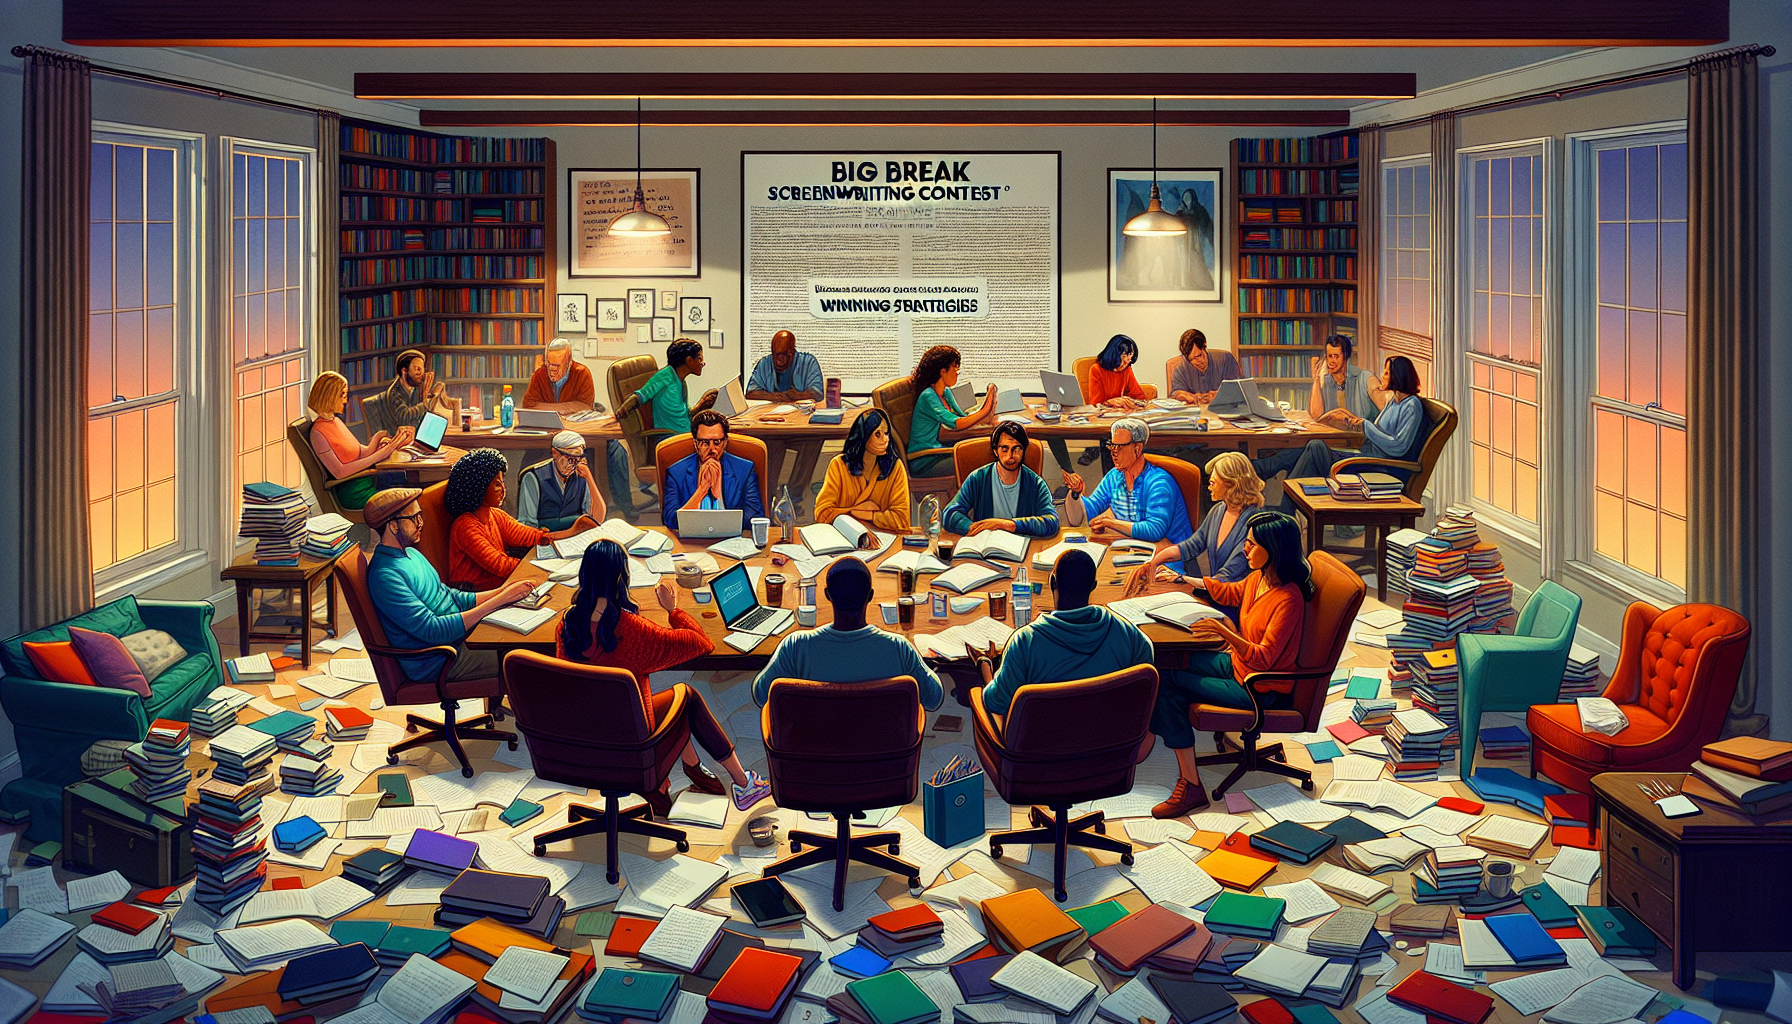 An artistically stylized image of a diverse group of people sitting around a large, cluttered table filled with scripts, notebooks, and laptops, deeply engrossed in discussion and writing, under soft,